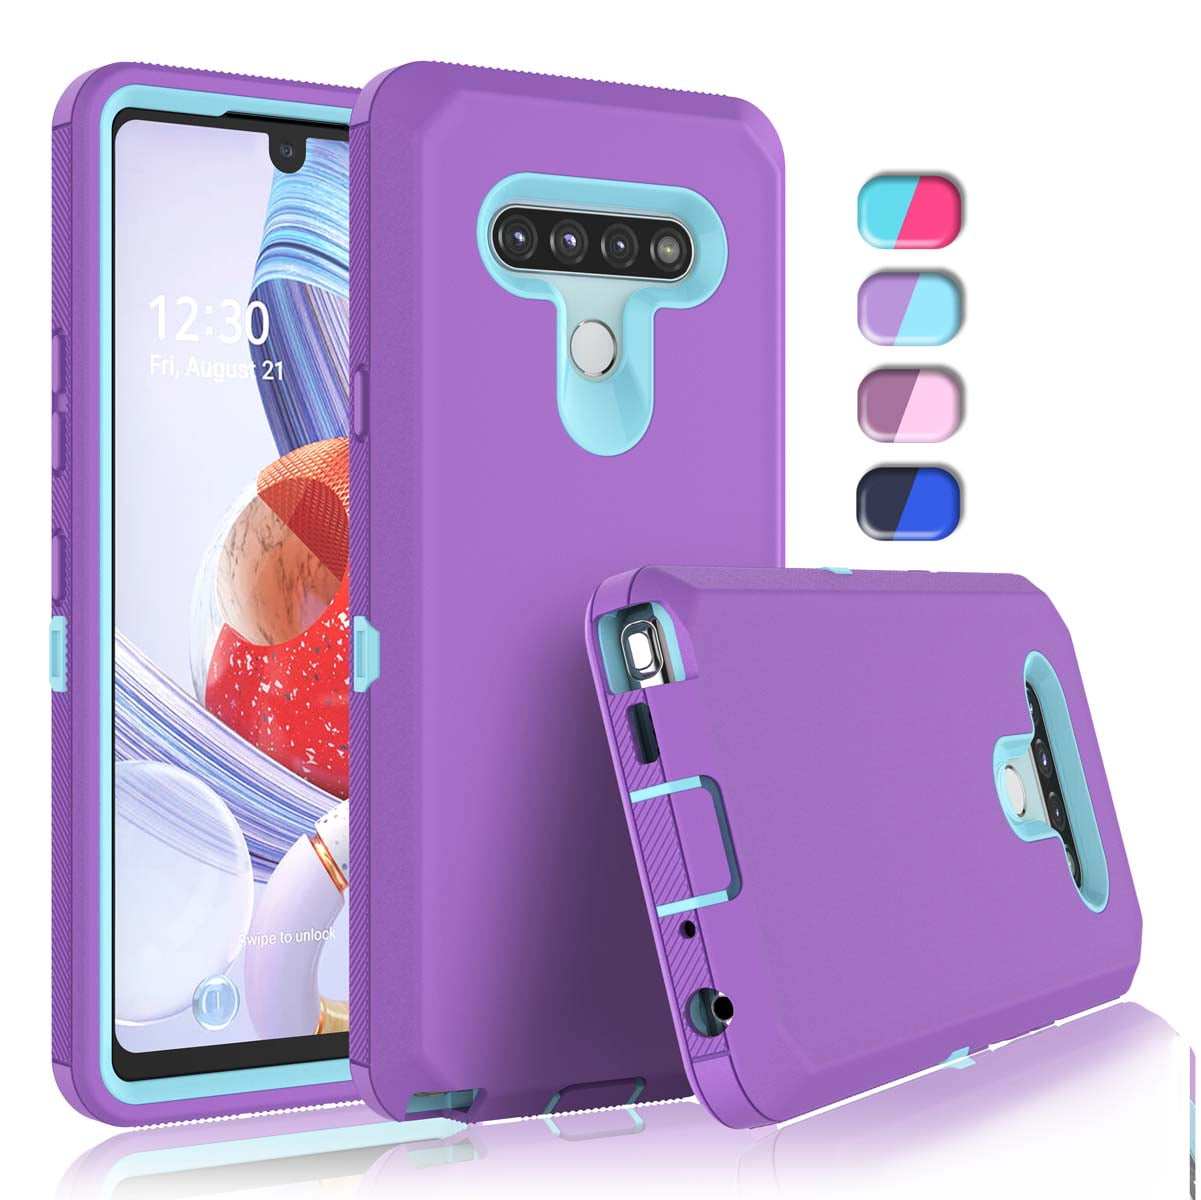 Full-Body Shockproof Protective Rugged Bumper Cover Built-in Screen Protector E-Began LG Stylo 5 Case with Impact Resist Durable Cute Case -Peach Blossom LG Stylo 5V/ Stylo 5X/ Stylo 5 Plus 